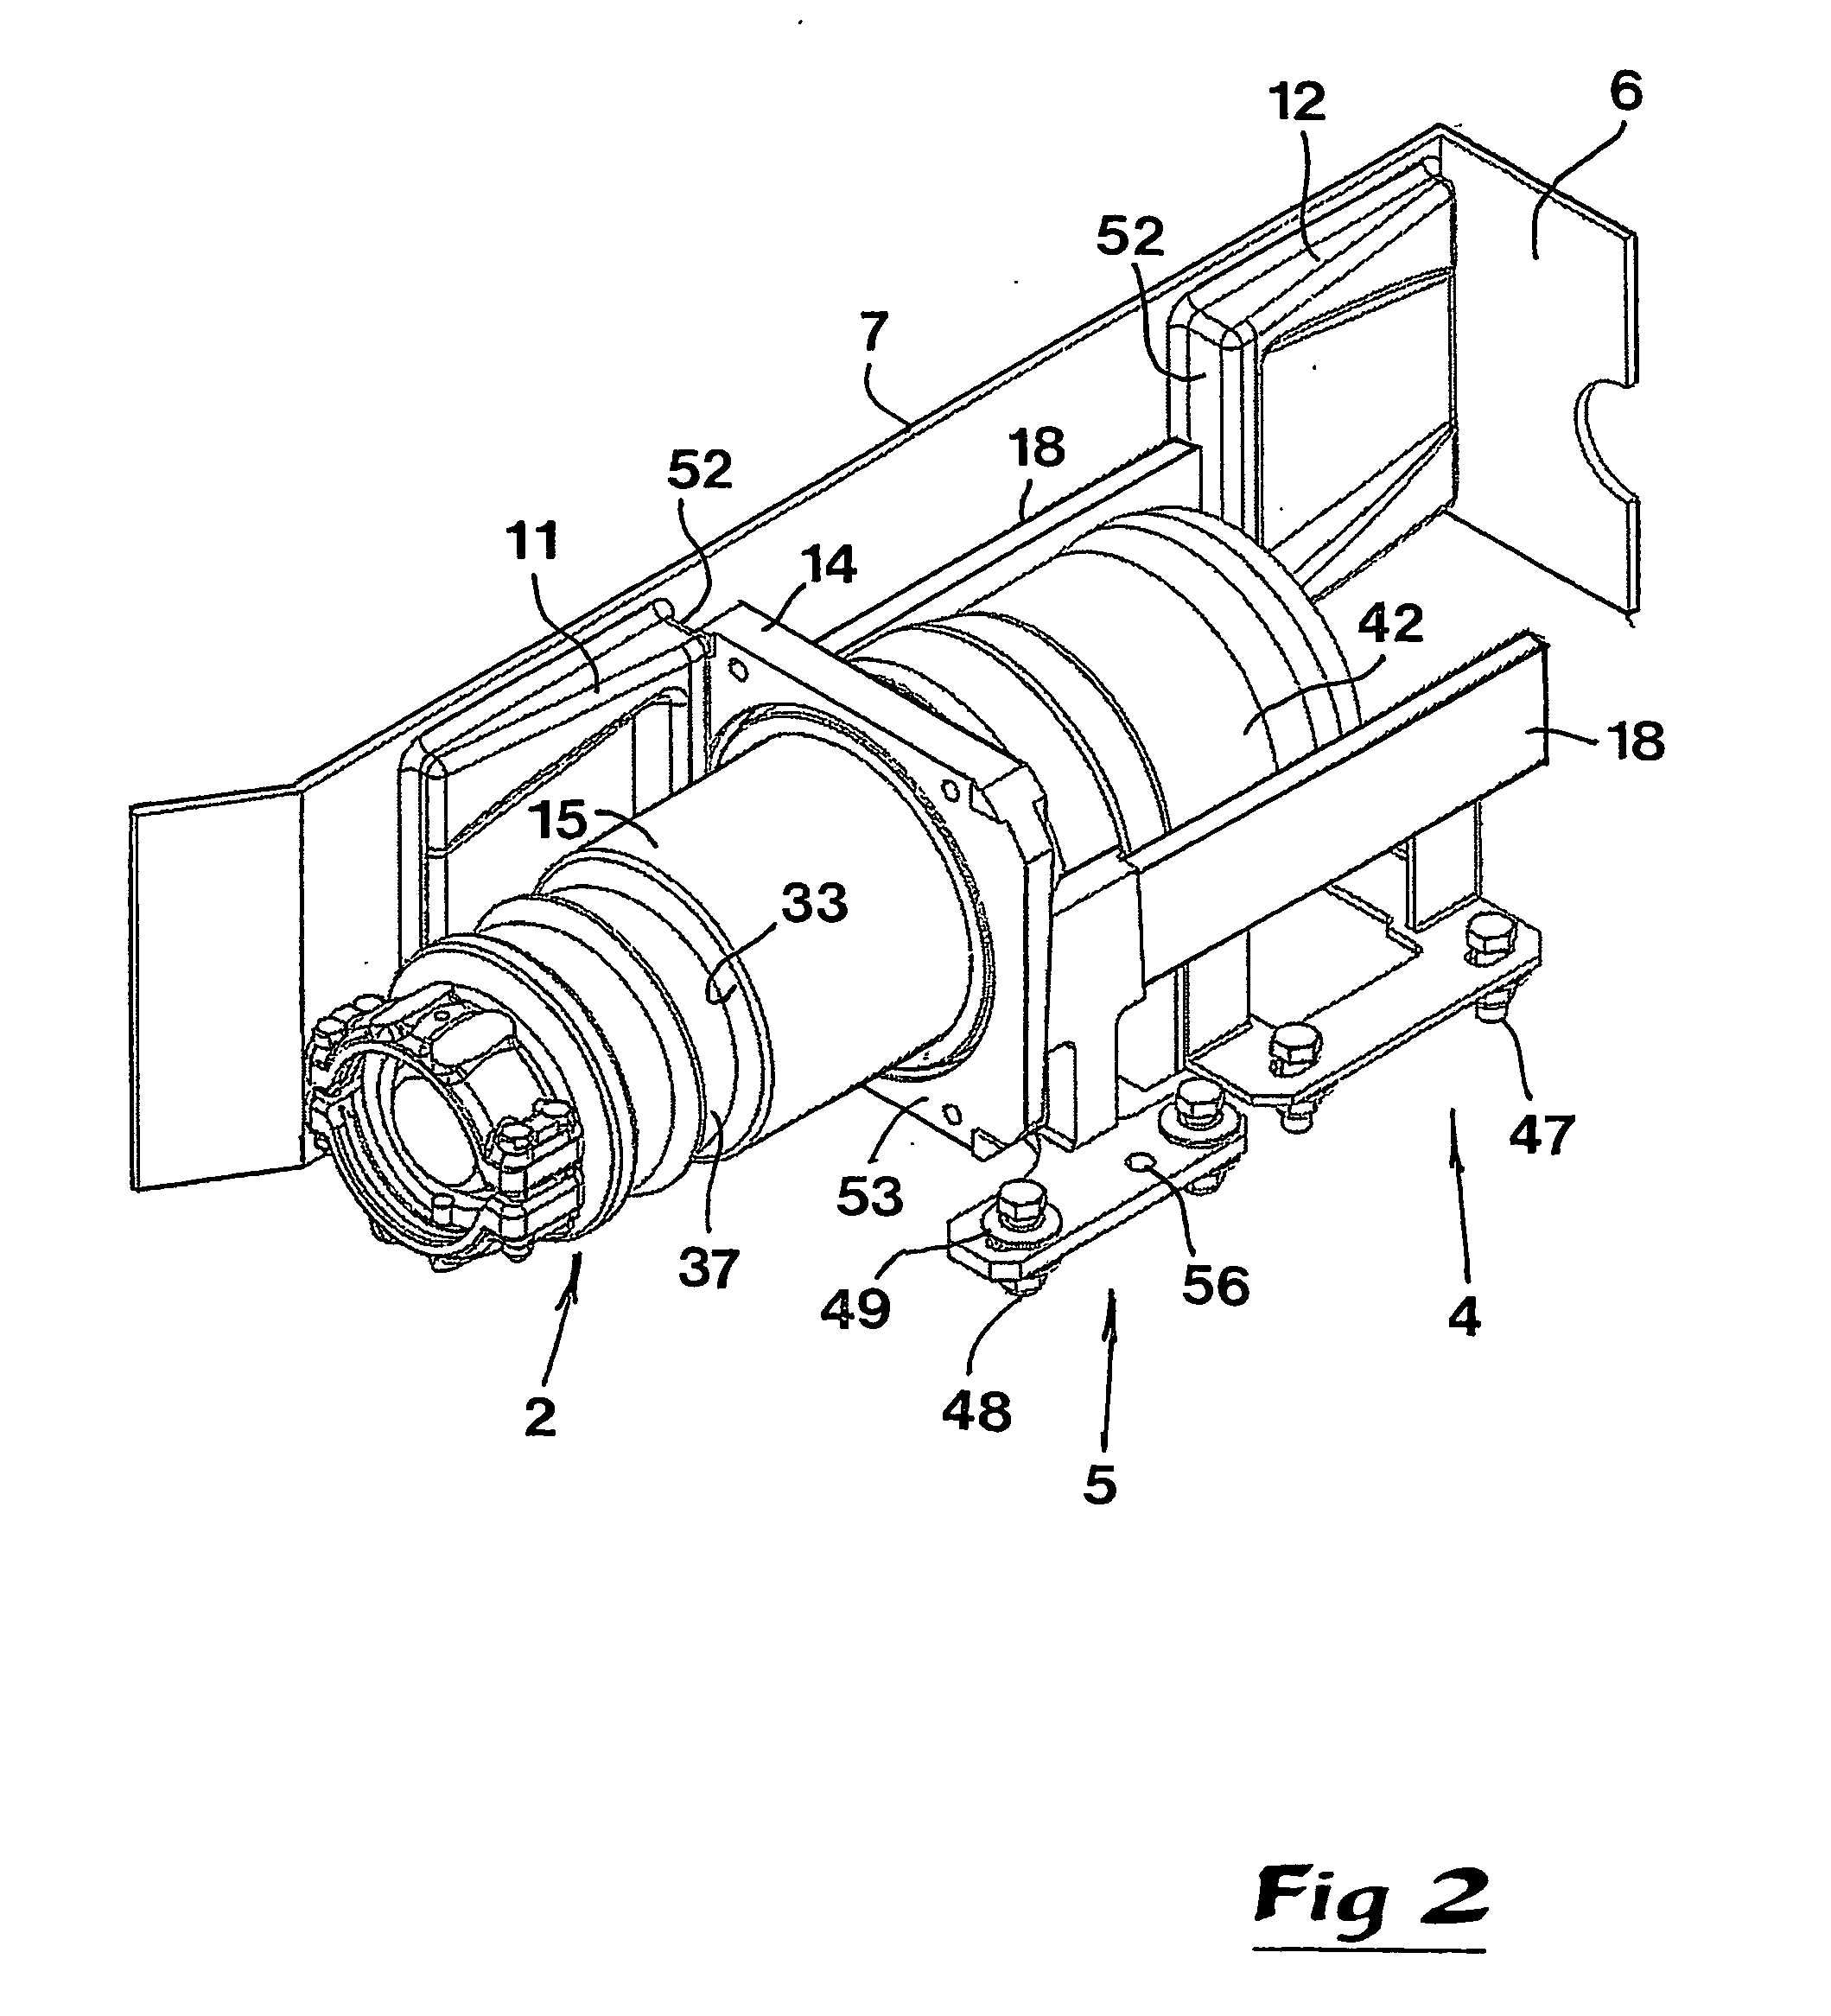 Railway vehicle and a clamping arrangement for the fixation of a towing arrangement in such vehicles